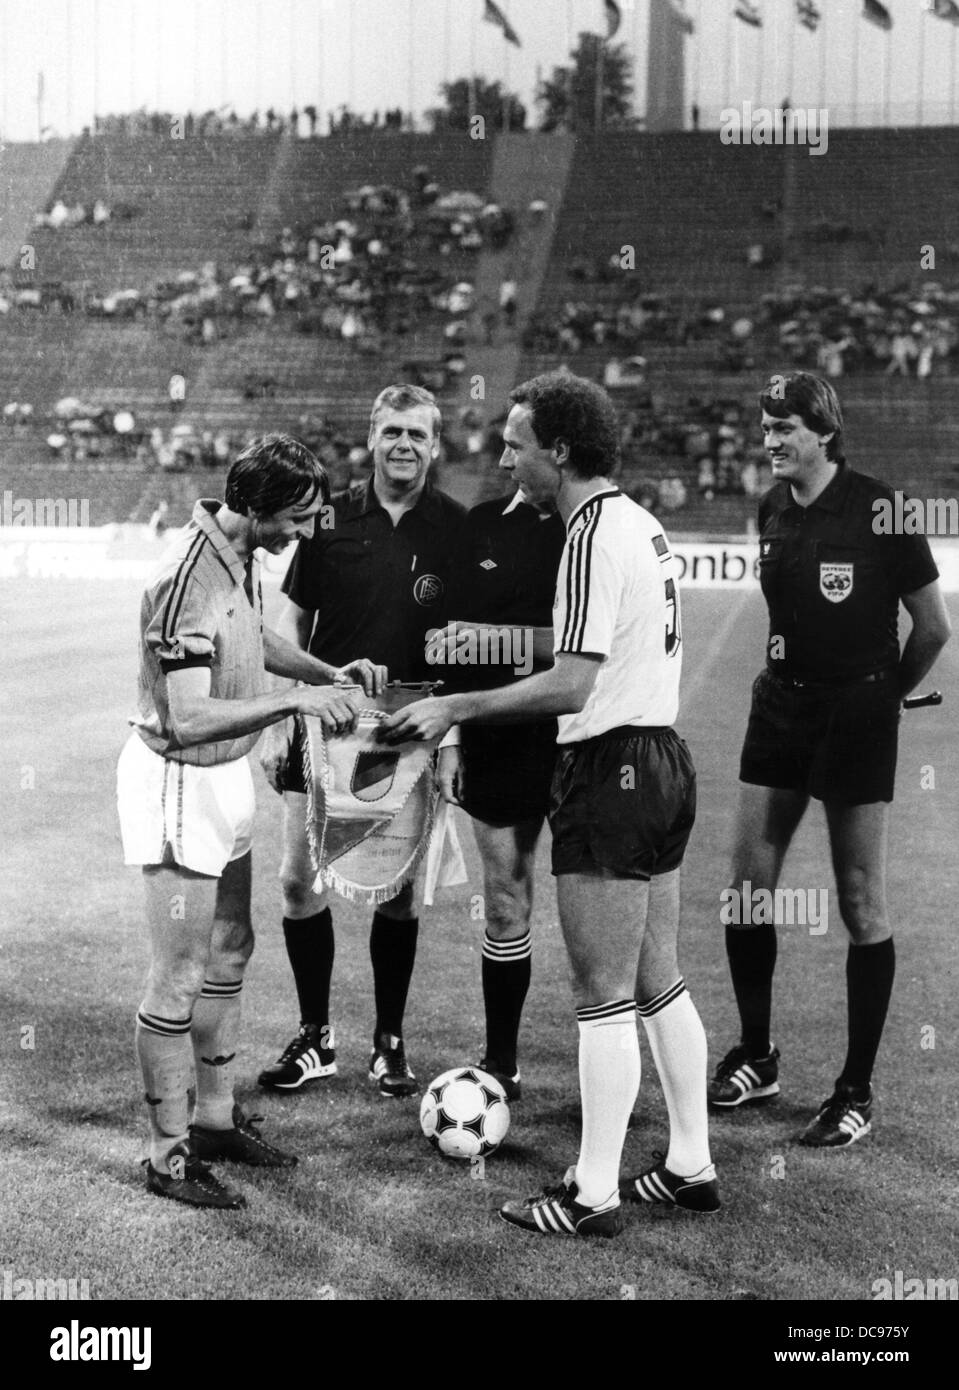 Johan Cruyff (l) and Franz Beckenbauer (2nd of right), the team leaders of the Dutch and German national team, exchange banners shortly before the match on the 3rd of July in 1984 in Munich. Stock Photo